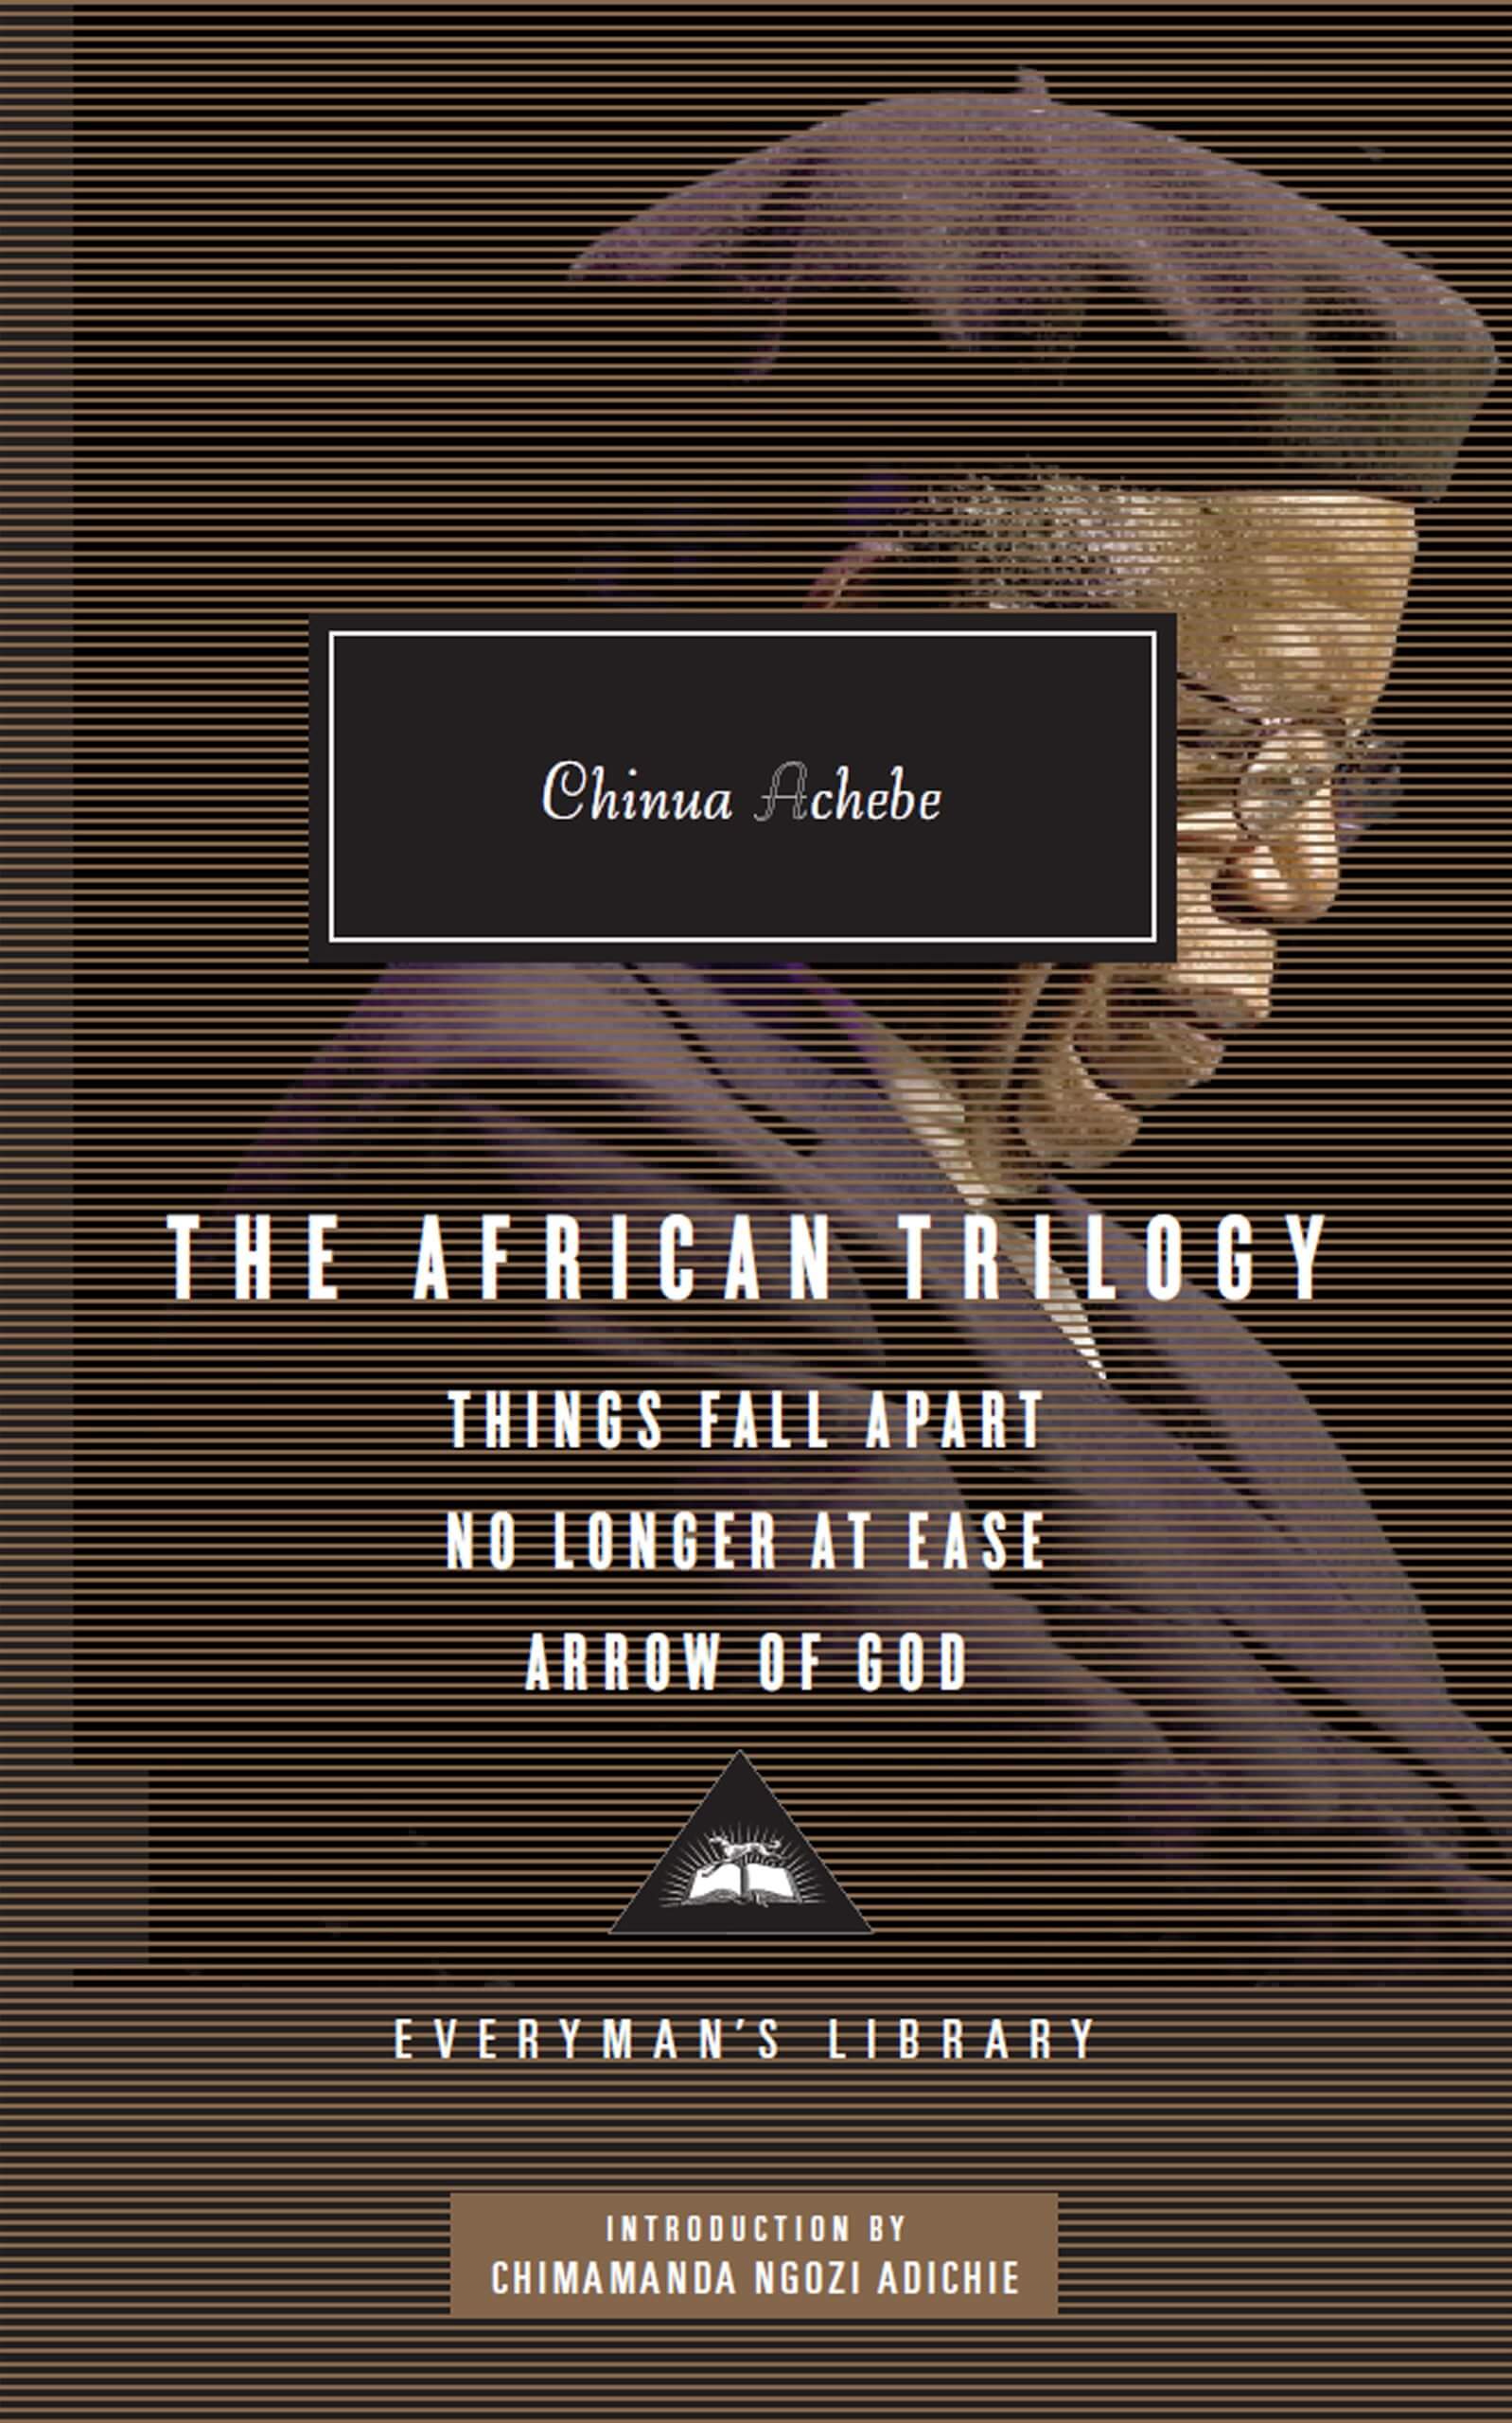 The African Trilogy Book in Sri Lanka